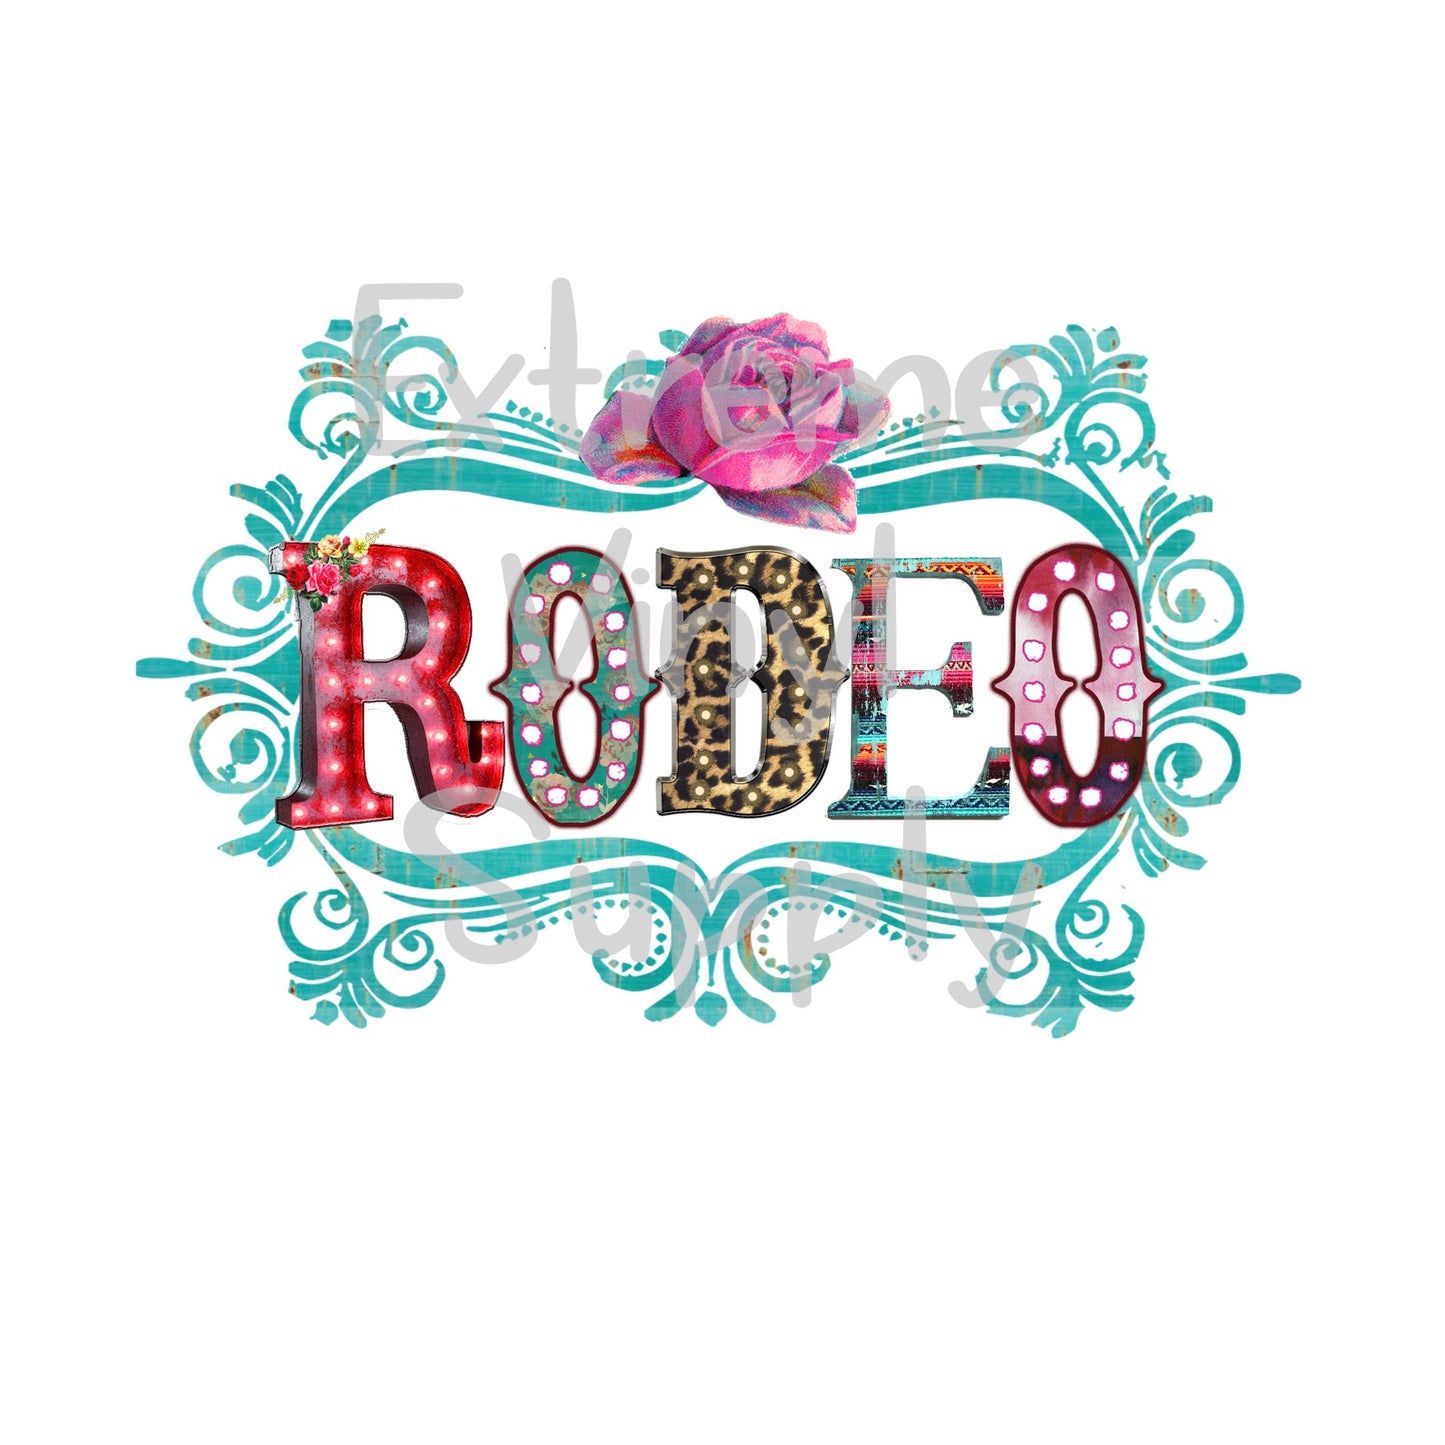 Rodeo Ready to Press Transfer or Sublimation